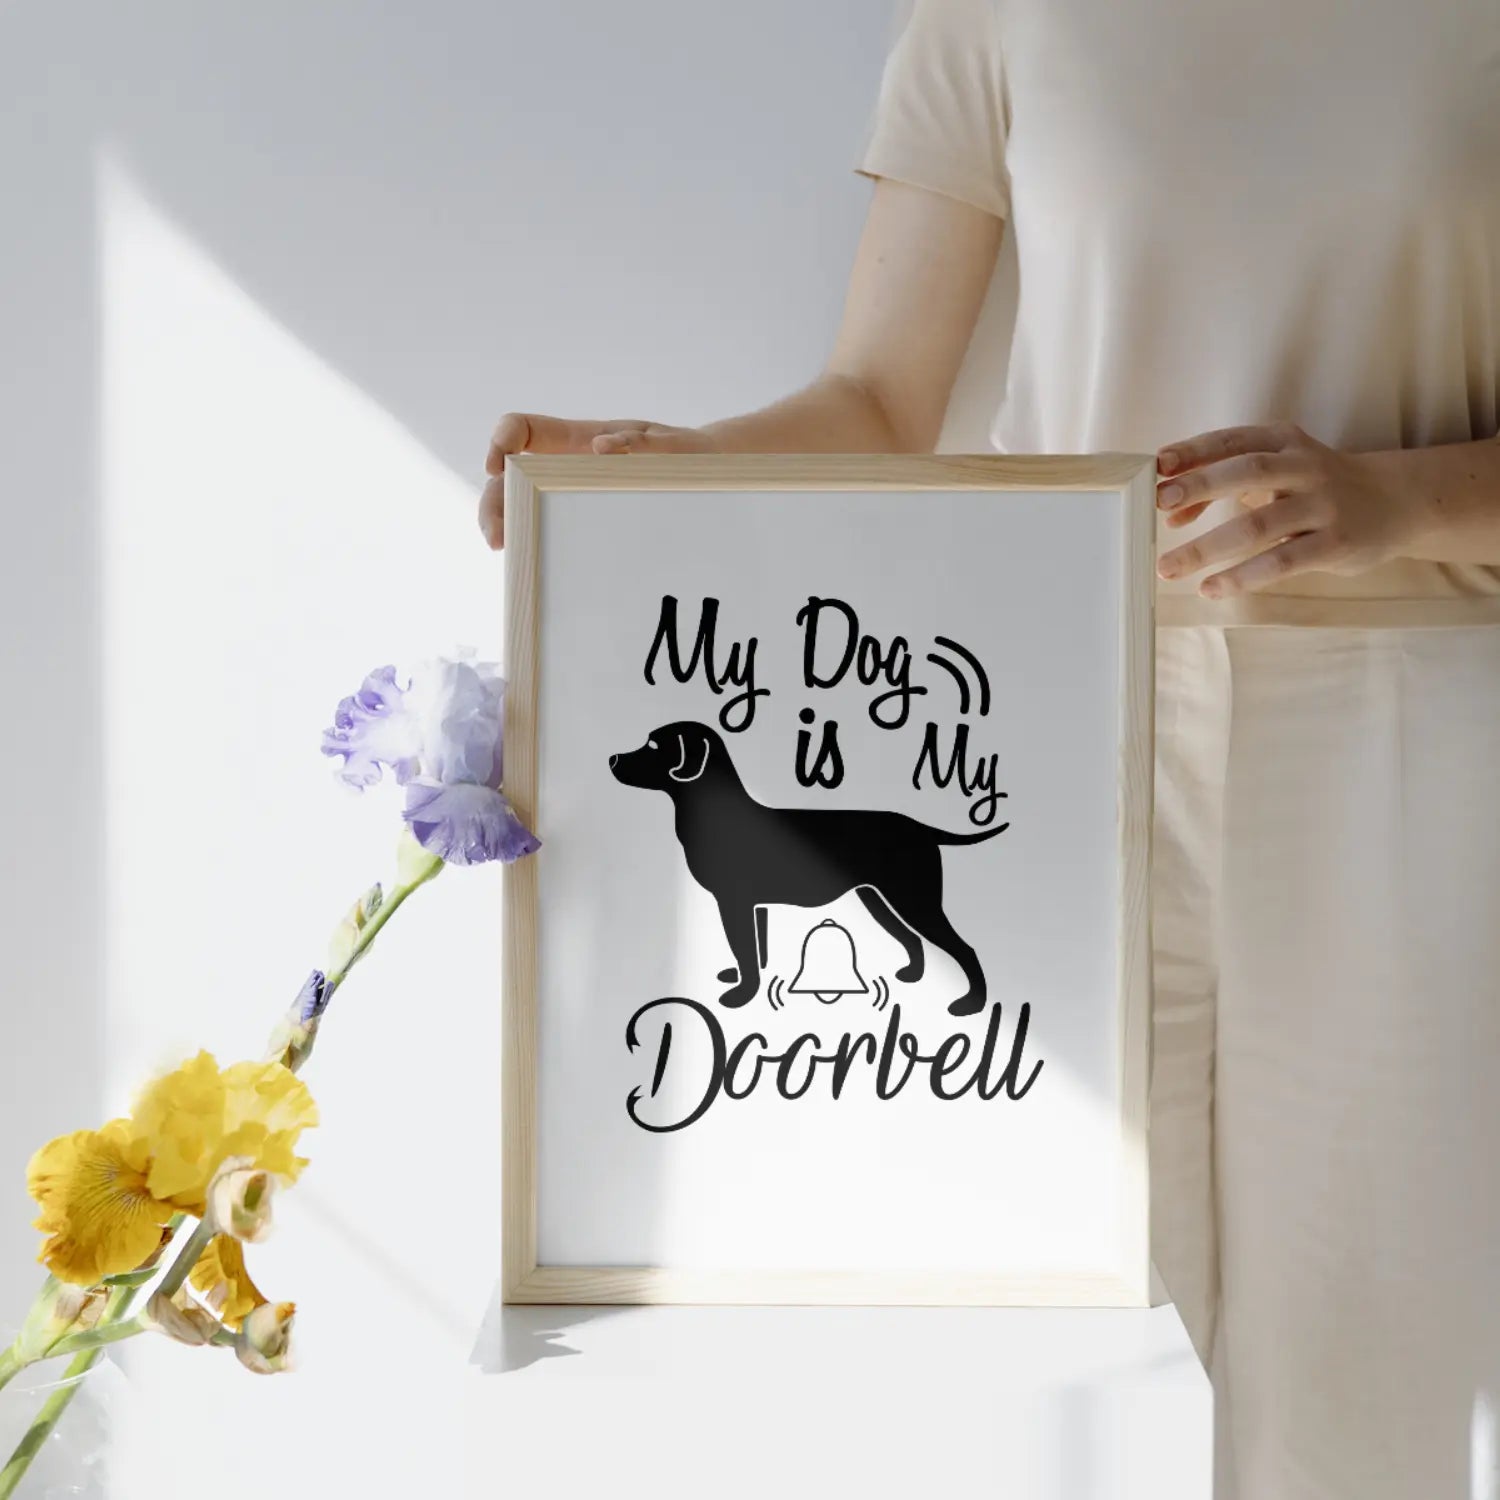 My Dog Is My Doorbell SVG | Digital Download | Cut File | SVG Only The Sweet Stuff